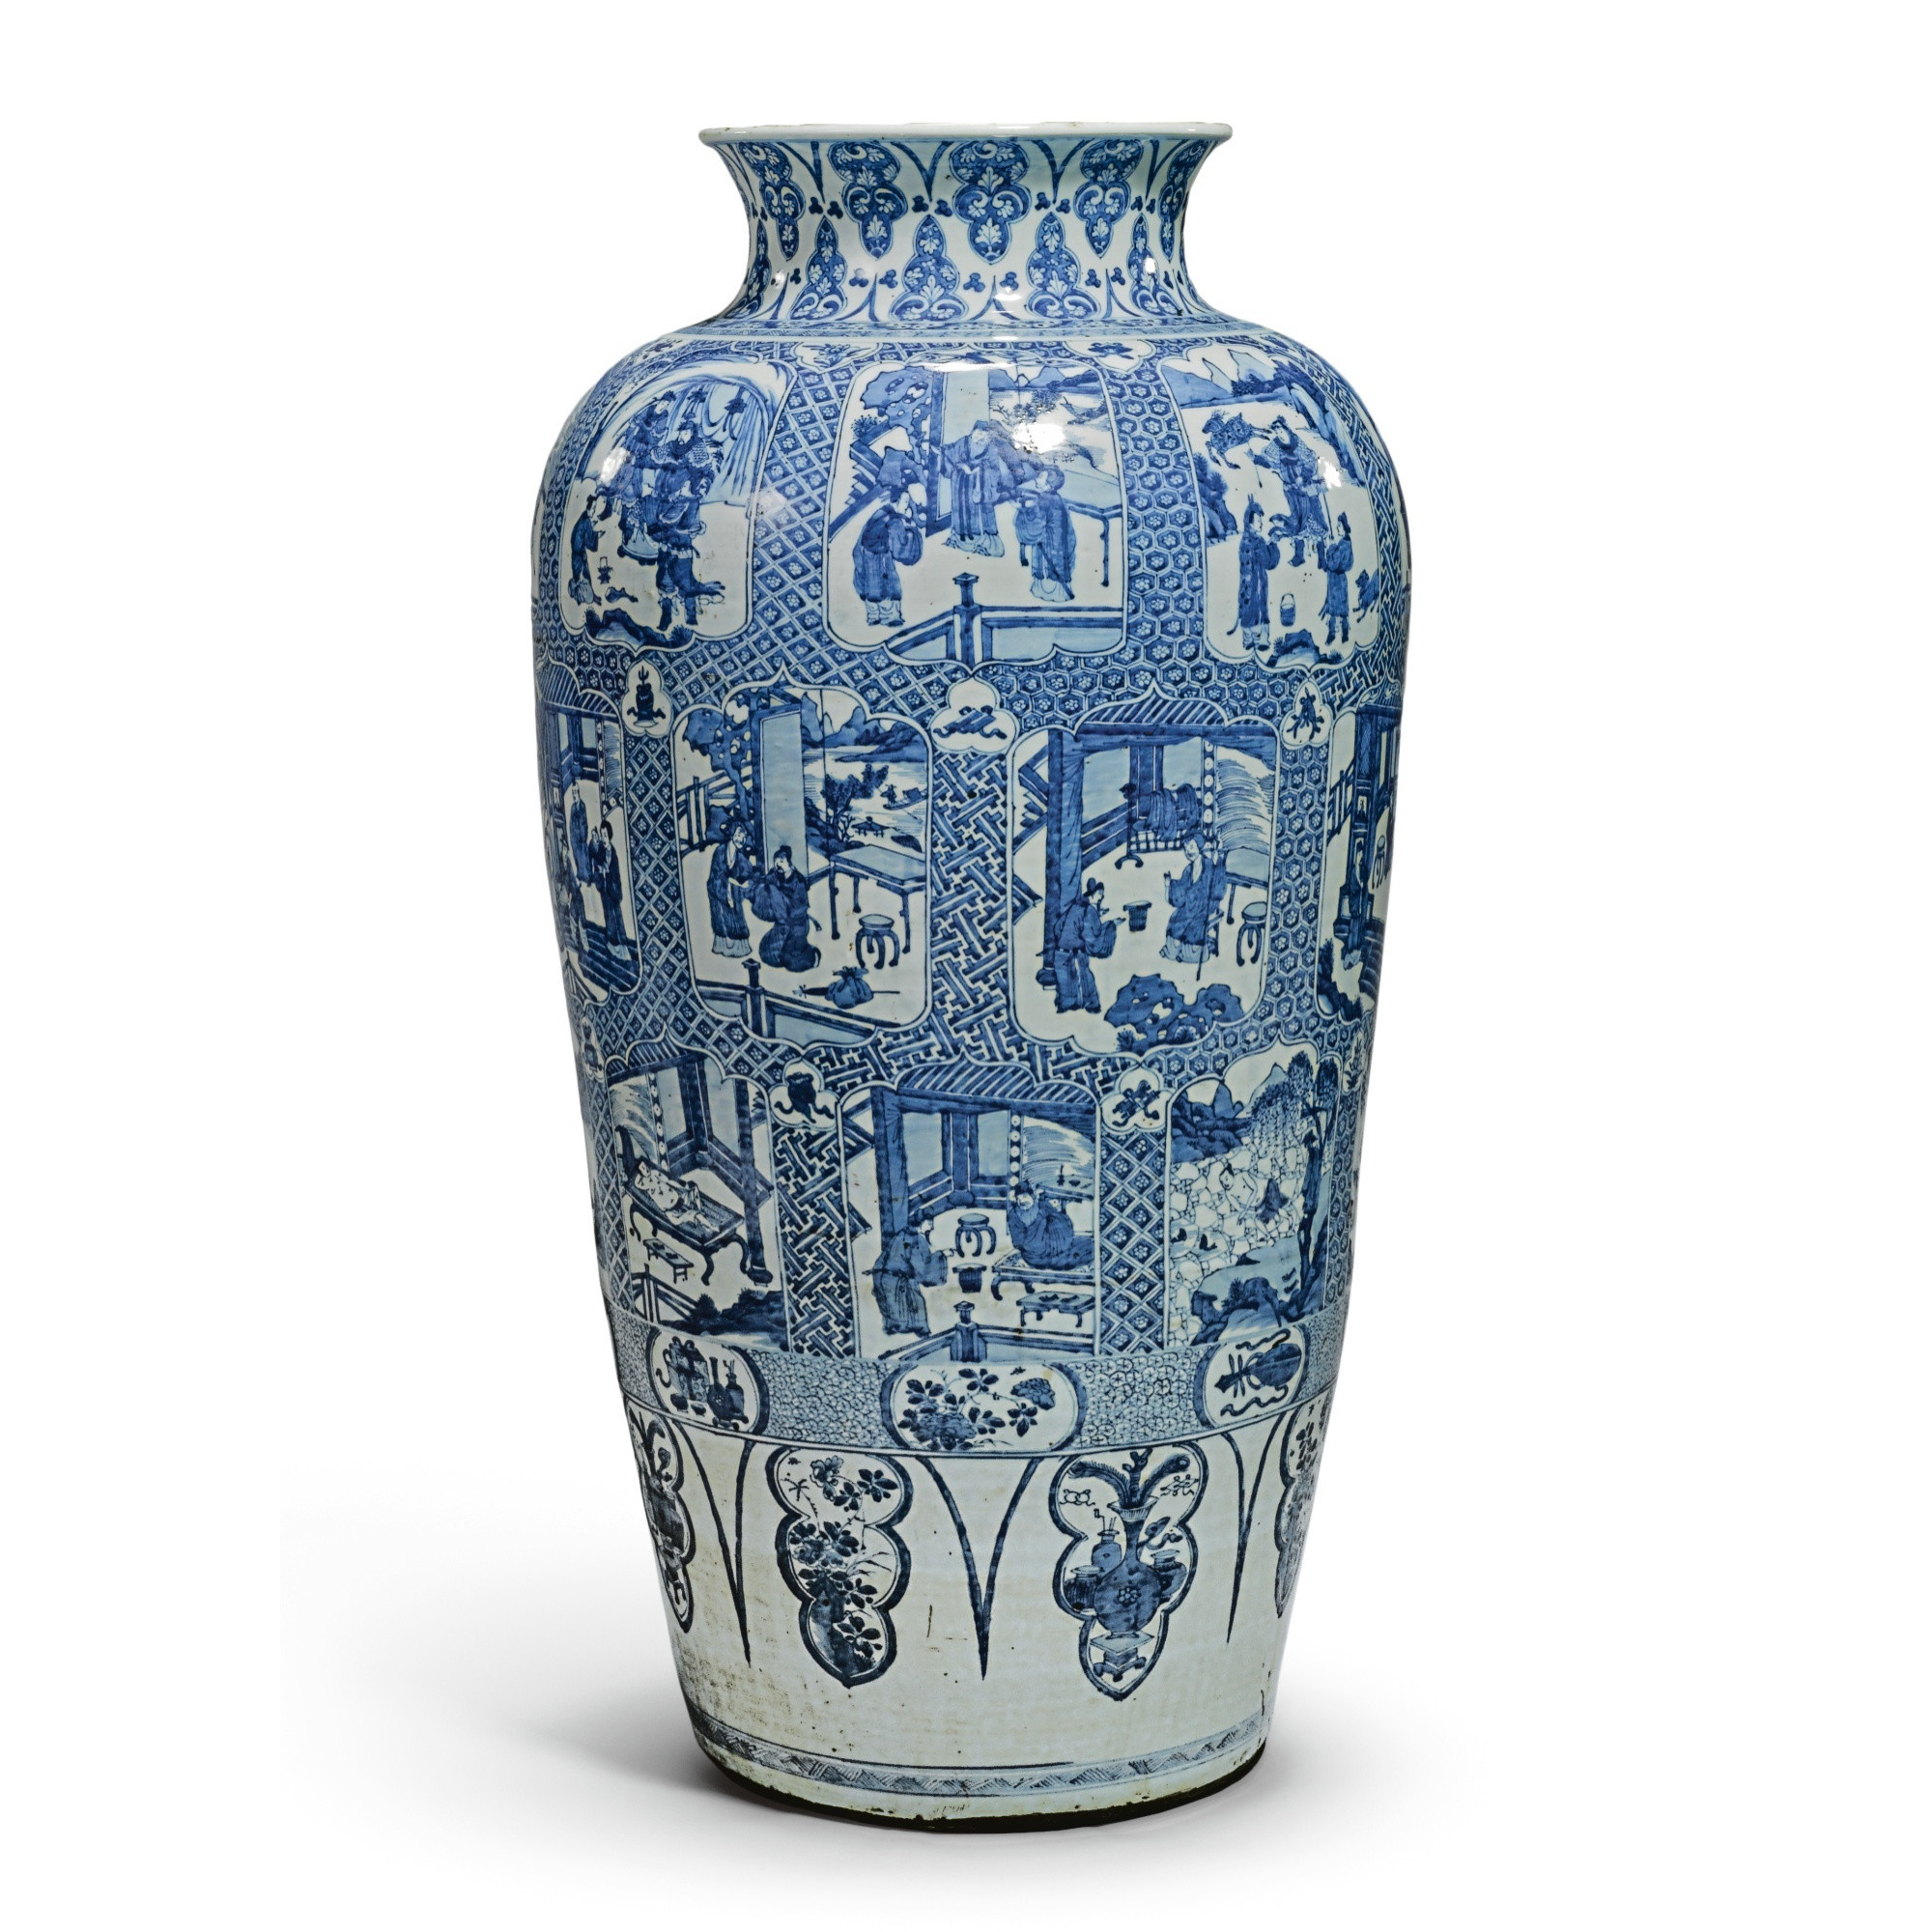 12 Fantastic Large Teal Vase 2024 free download large teal vase of a large chinese kangxi blue and white soldier vase painted with throughout a large chinese kangxi blue and white soldier vase painted with the twenty